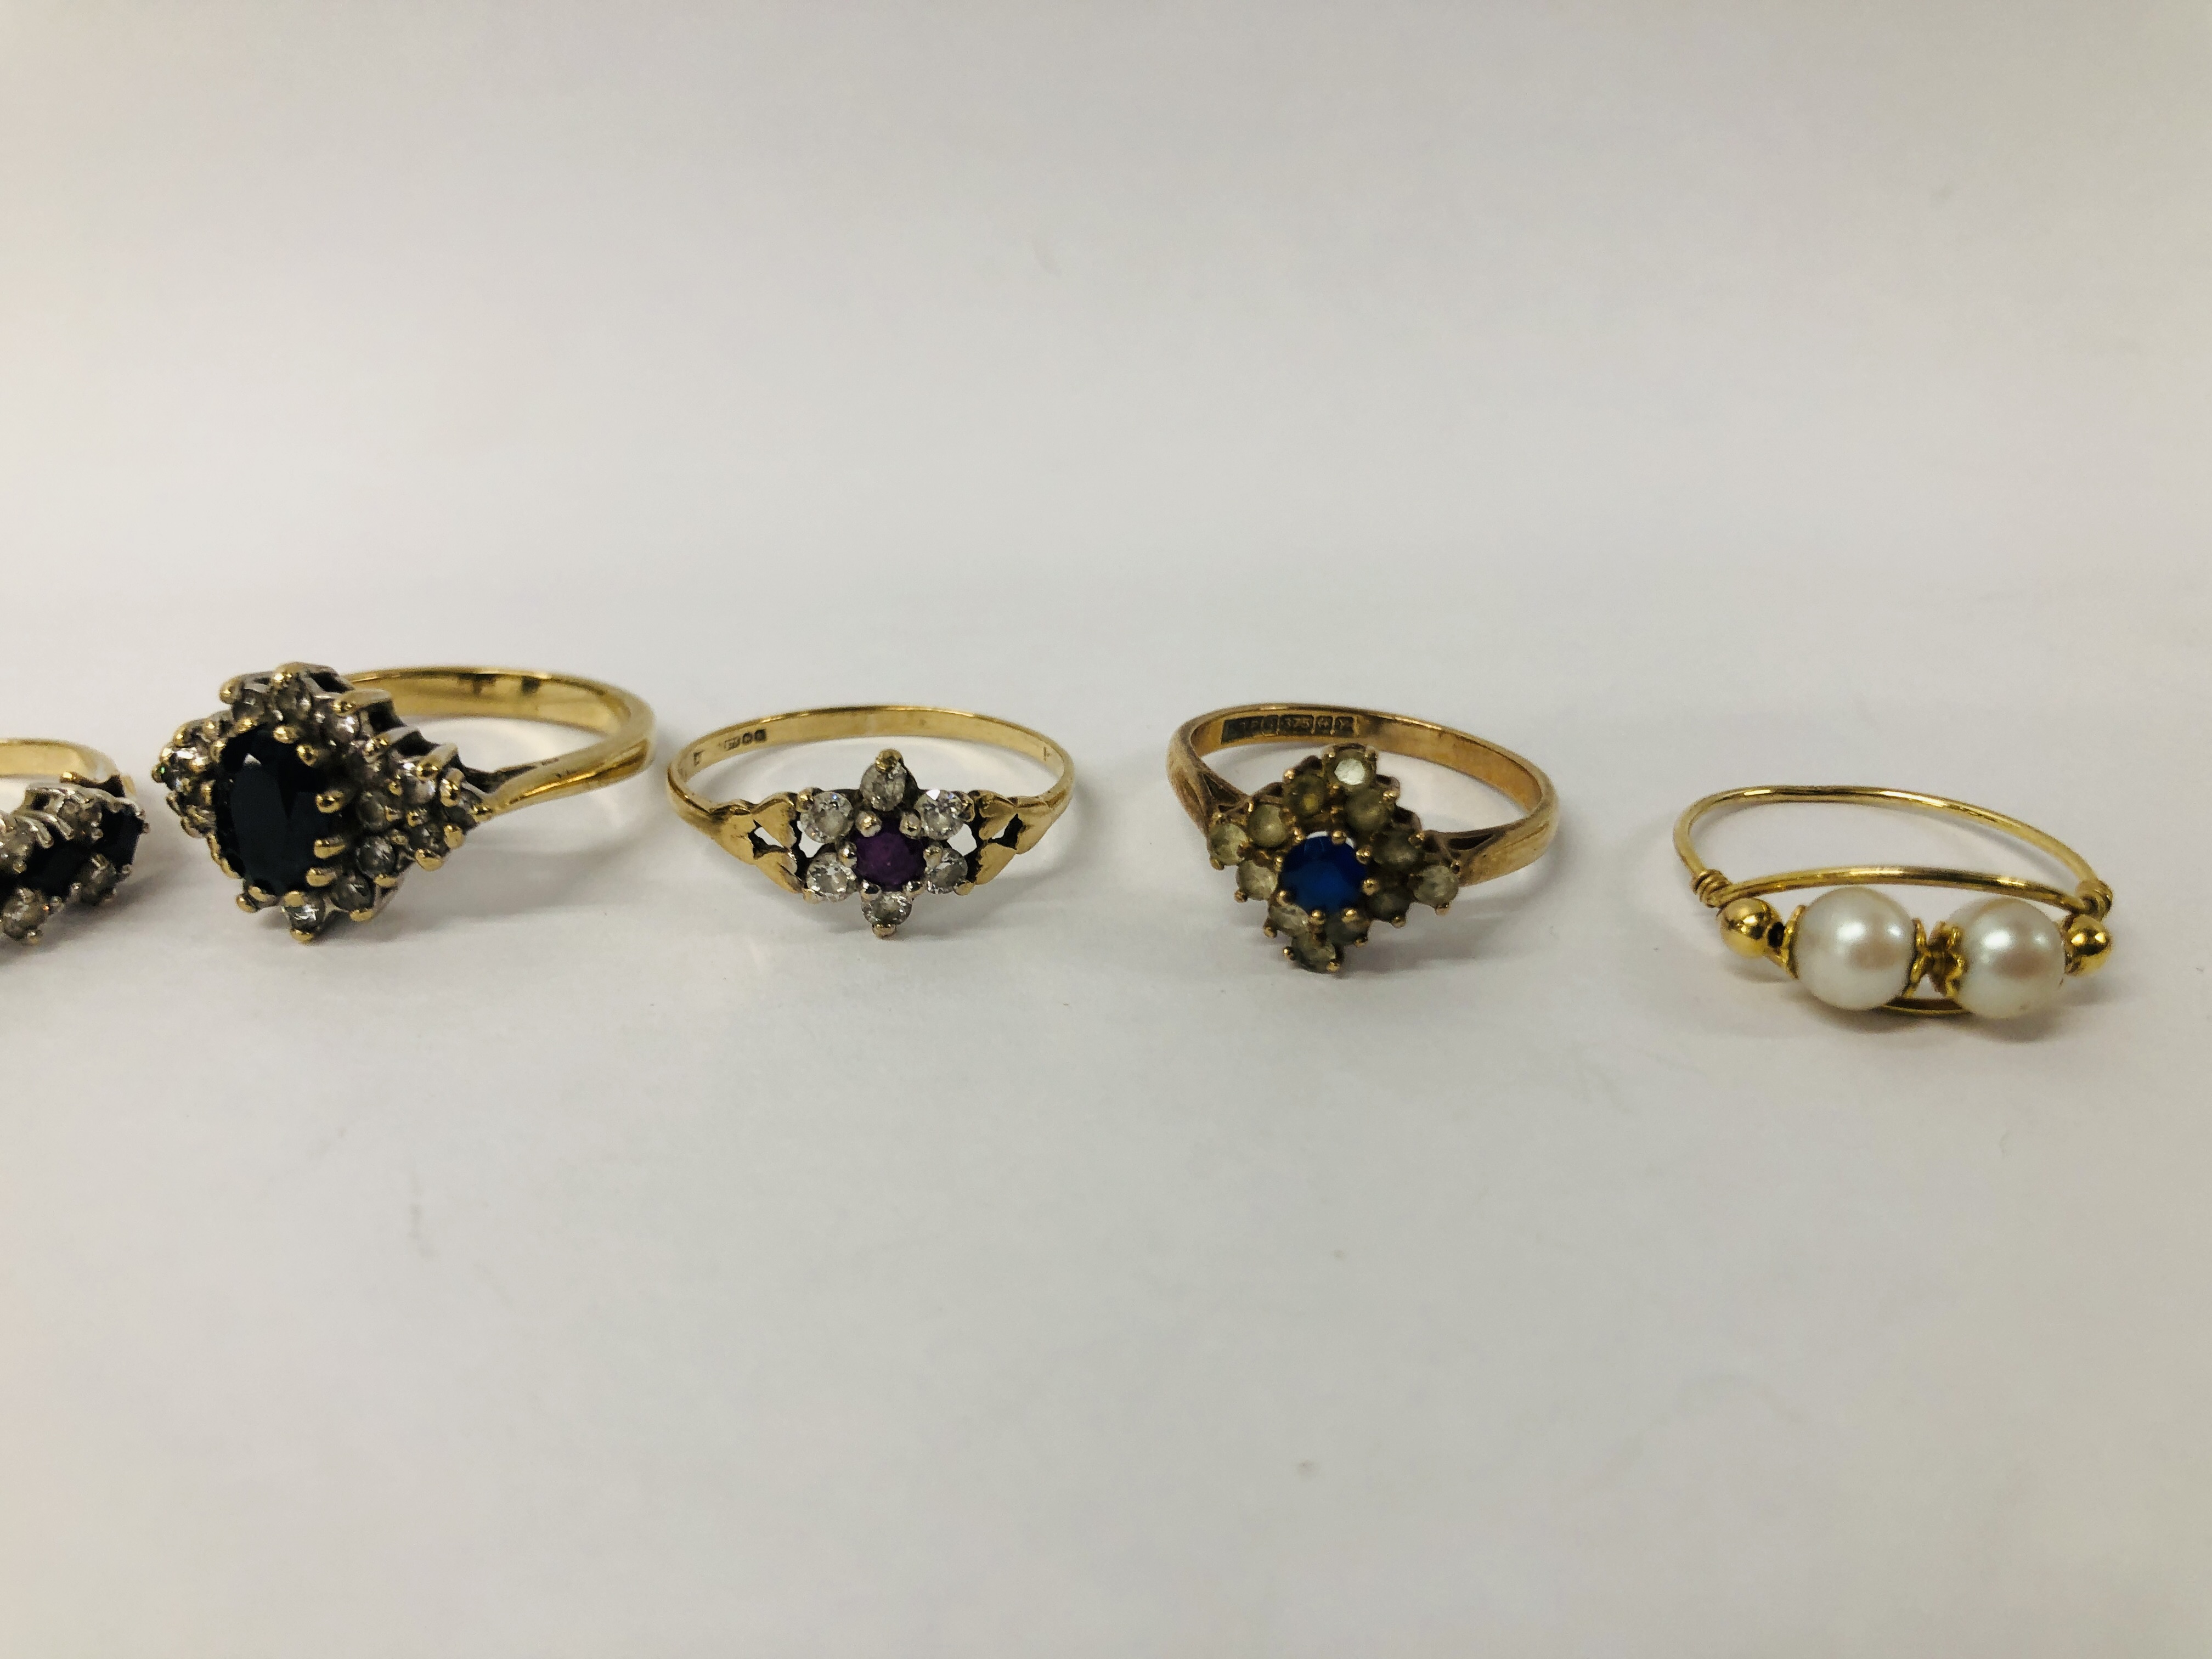 FOUR VARIOUS 9CT. GOLD STONE SET DRESS RINGS AND ONE PEARL SET RING MARKED 9KT. - Image 3 of 9